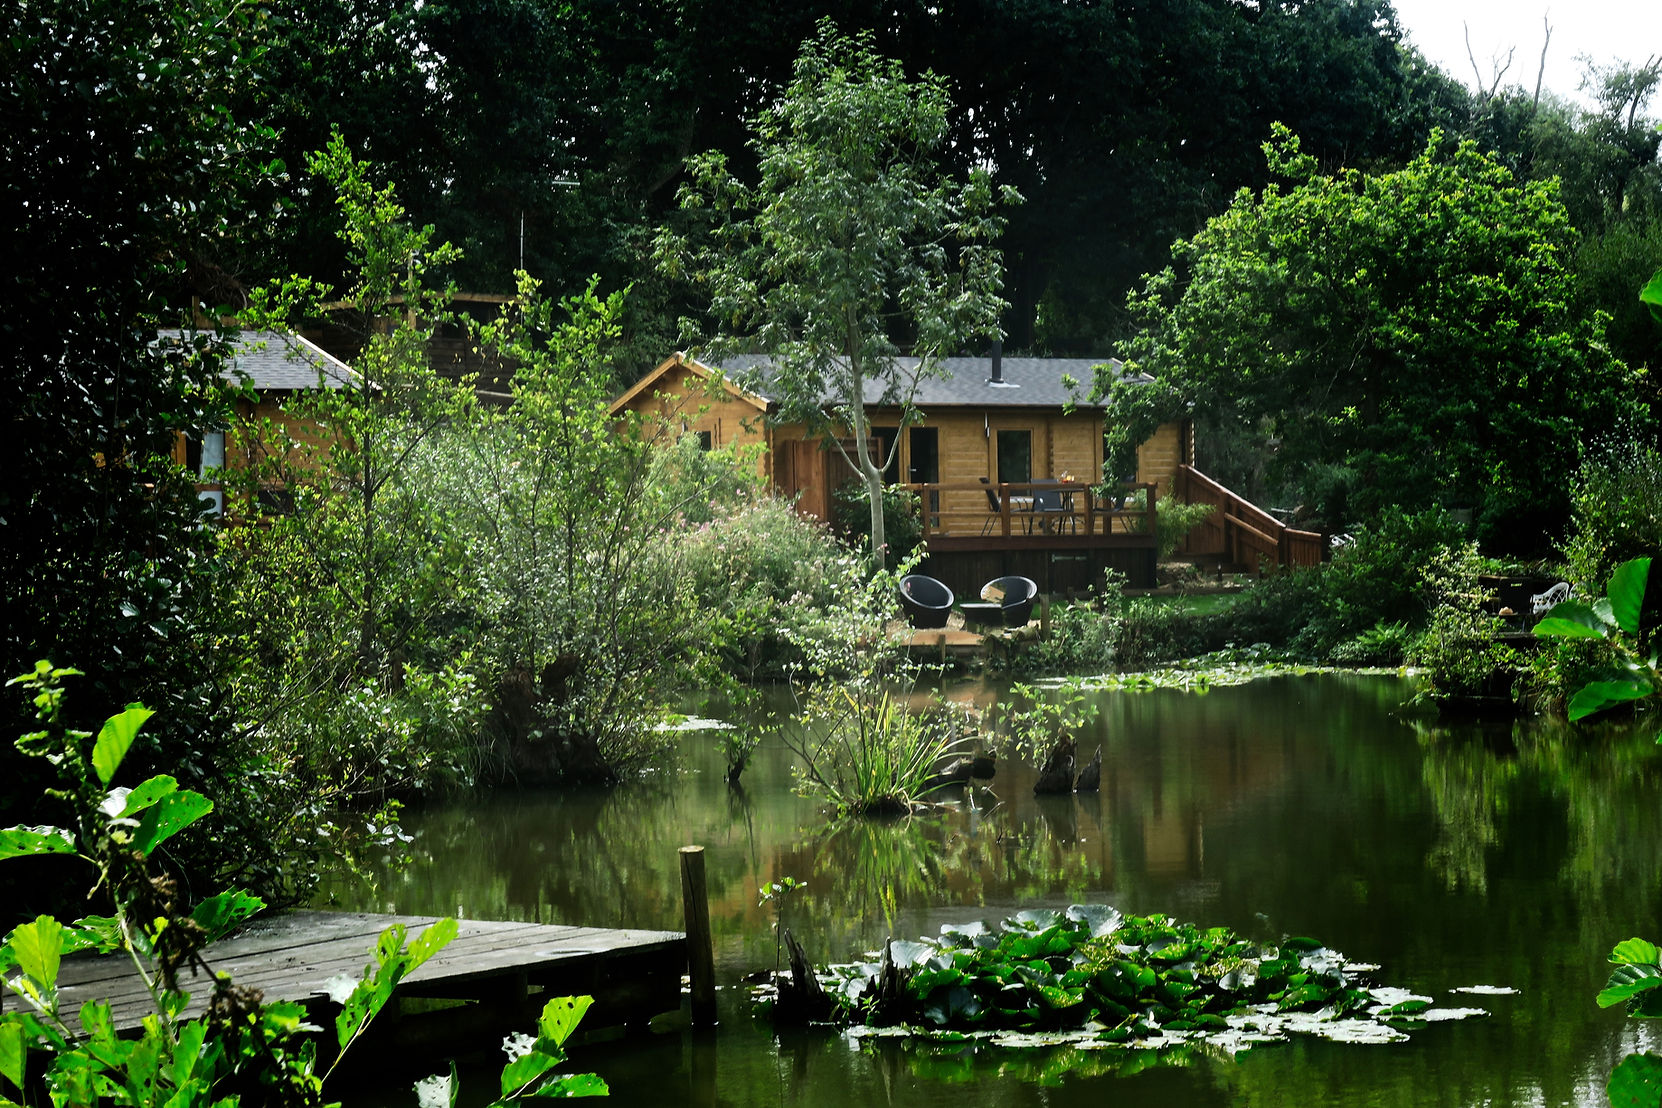 Picture of the cabins on the edge of alverstone ponds lake